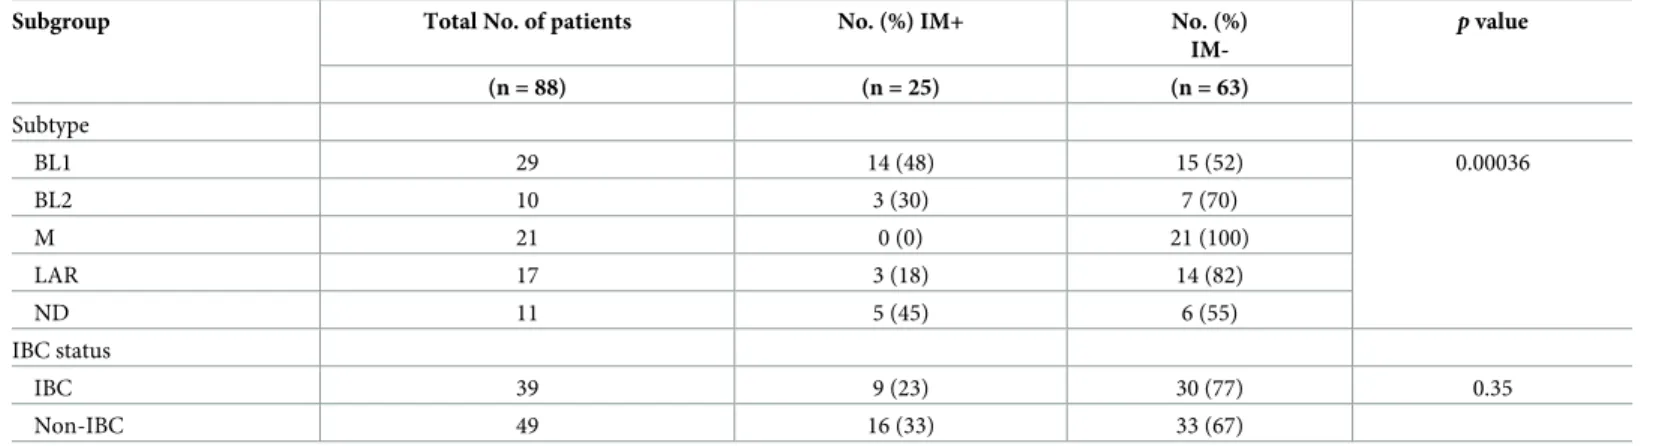 Table 2. Distribution of IM signature in patients with TNBC by molecular subtype and IBC status.